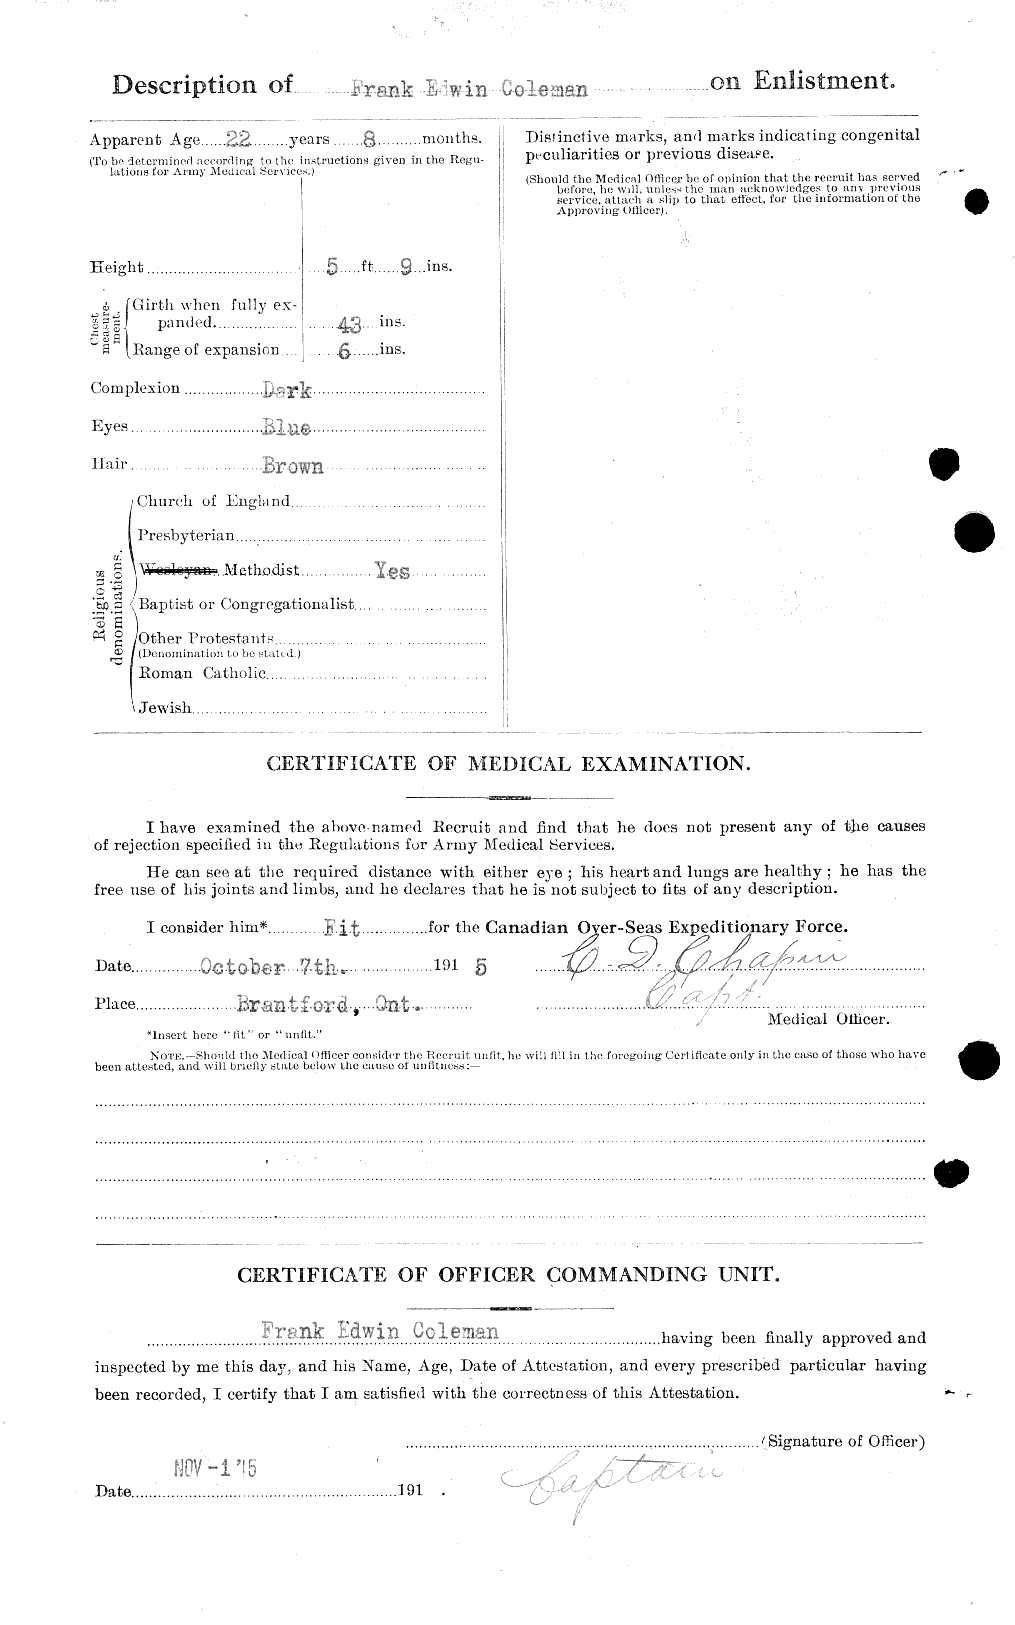 Personnel Records of the First World War - CEF 028129b